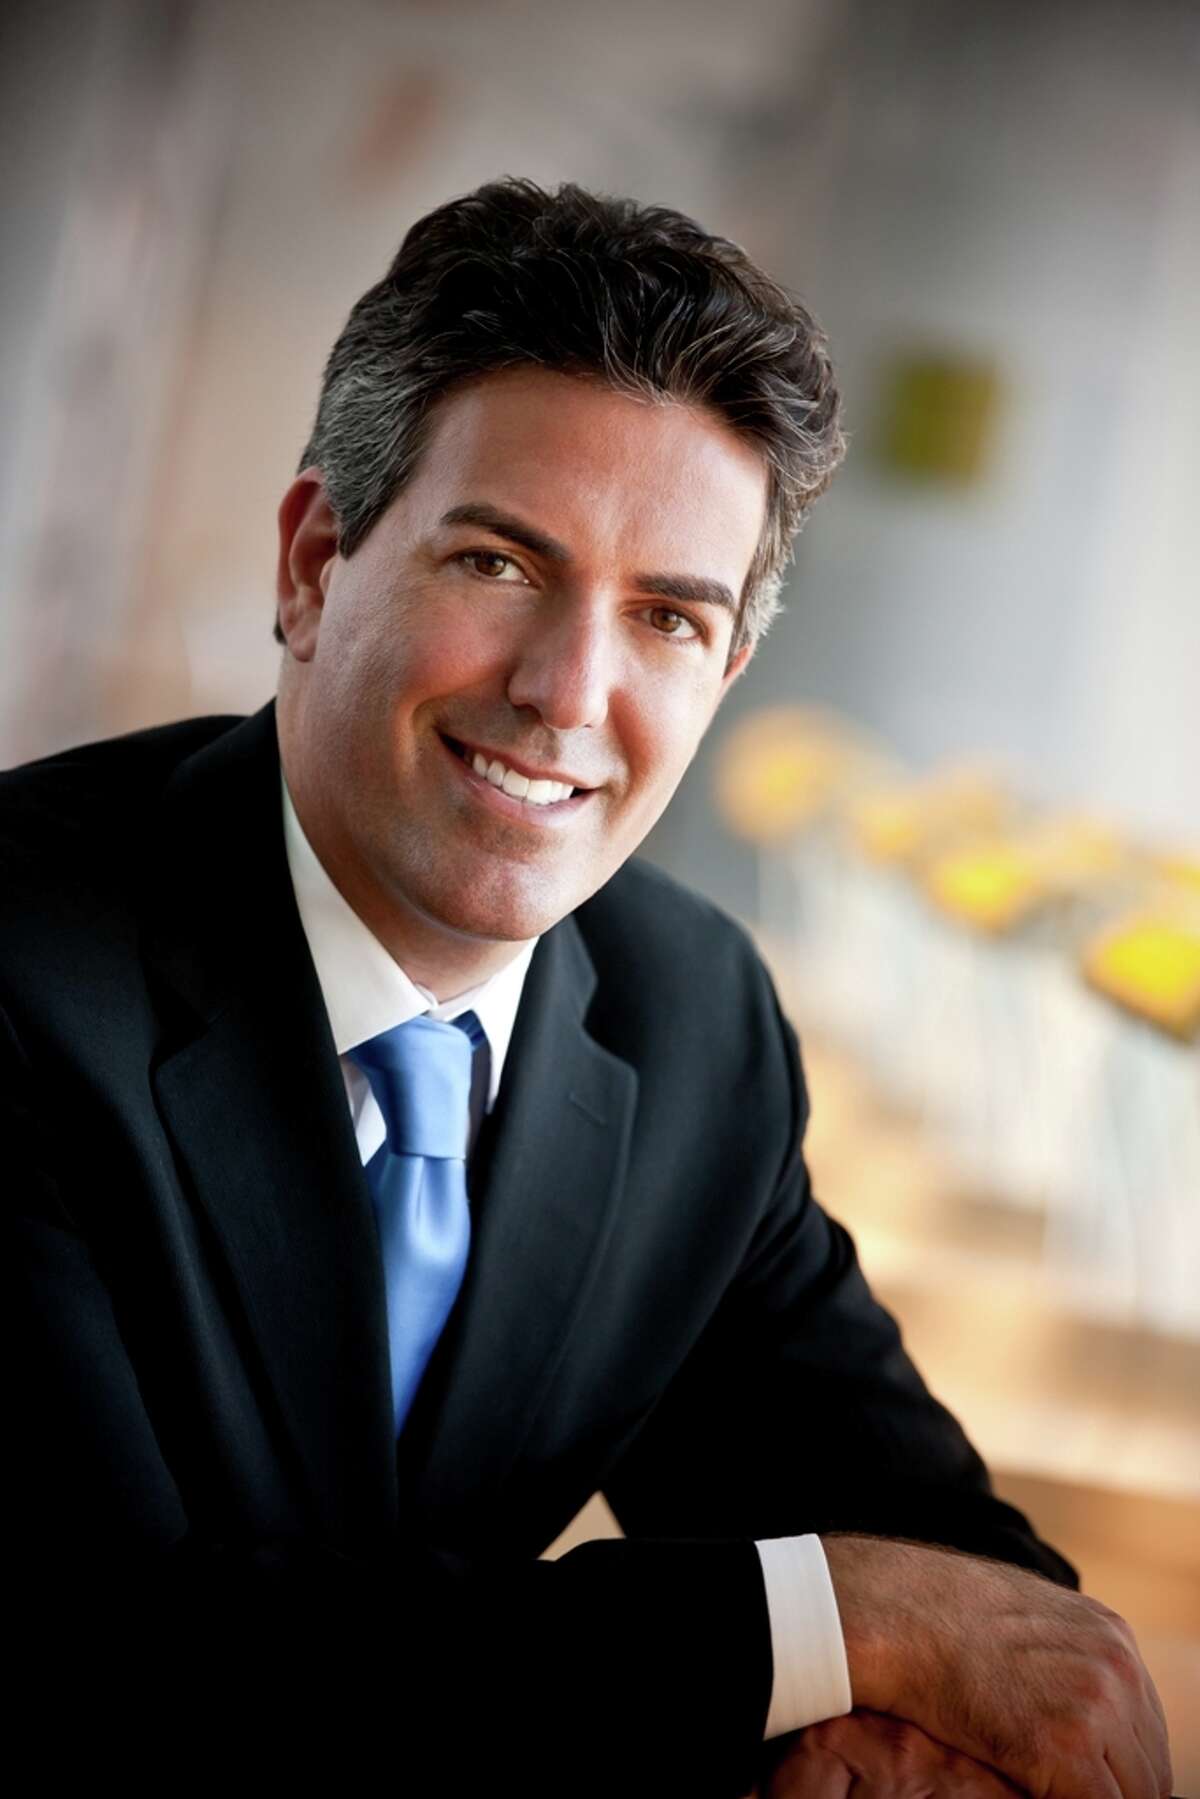 Wayne Pacelle, president and CEO of the Humane Society of the United States